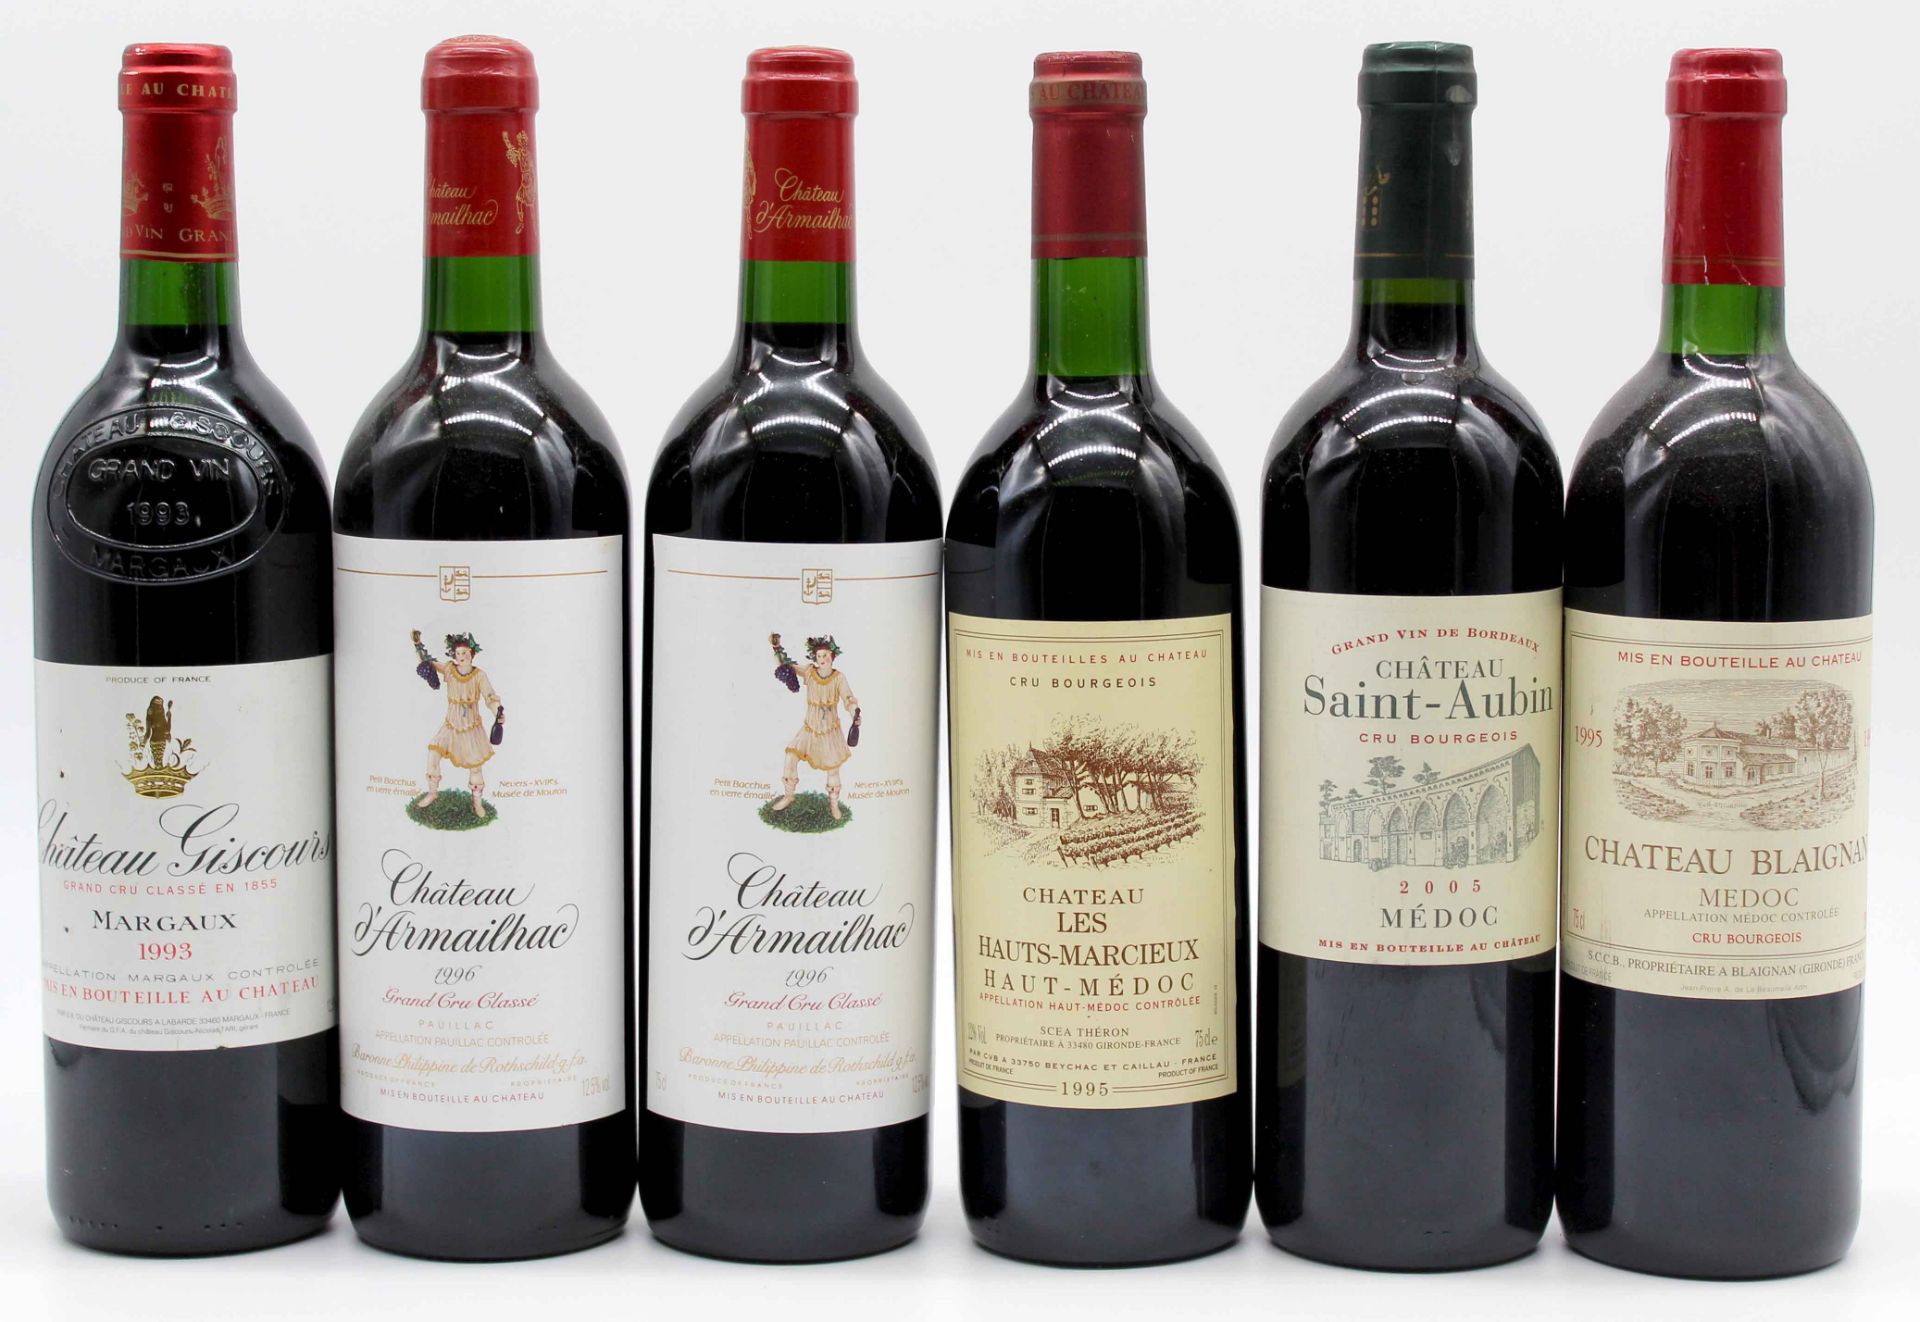 6 whole bottles of Bordeaux red wine, France.